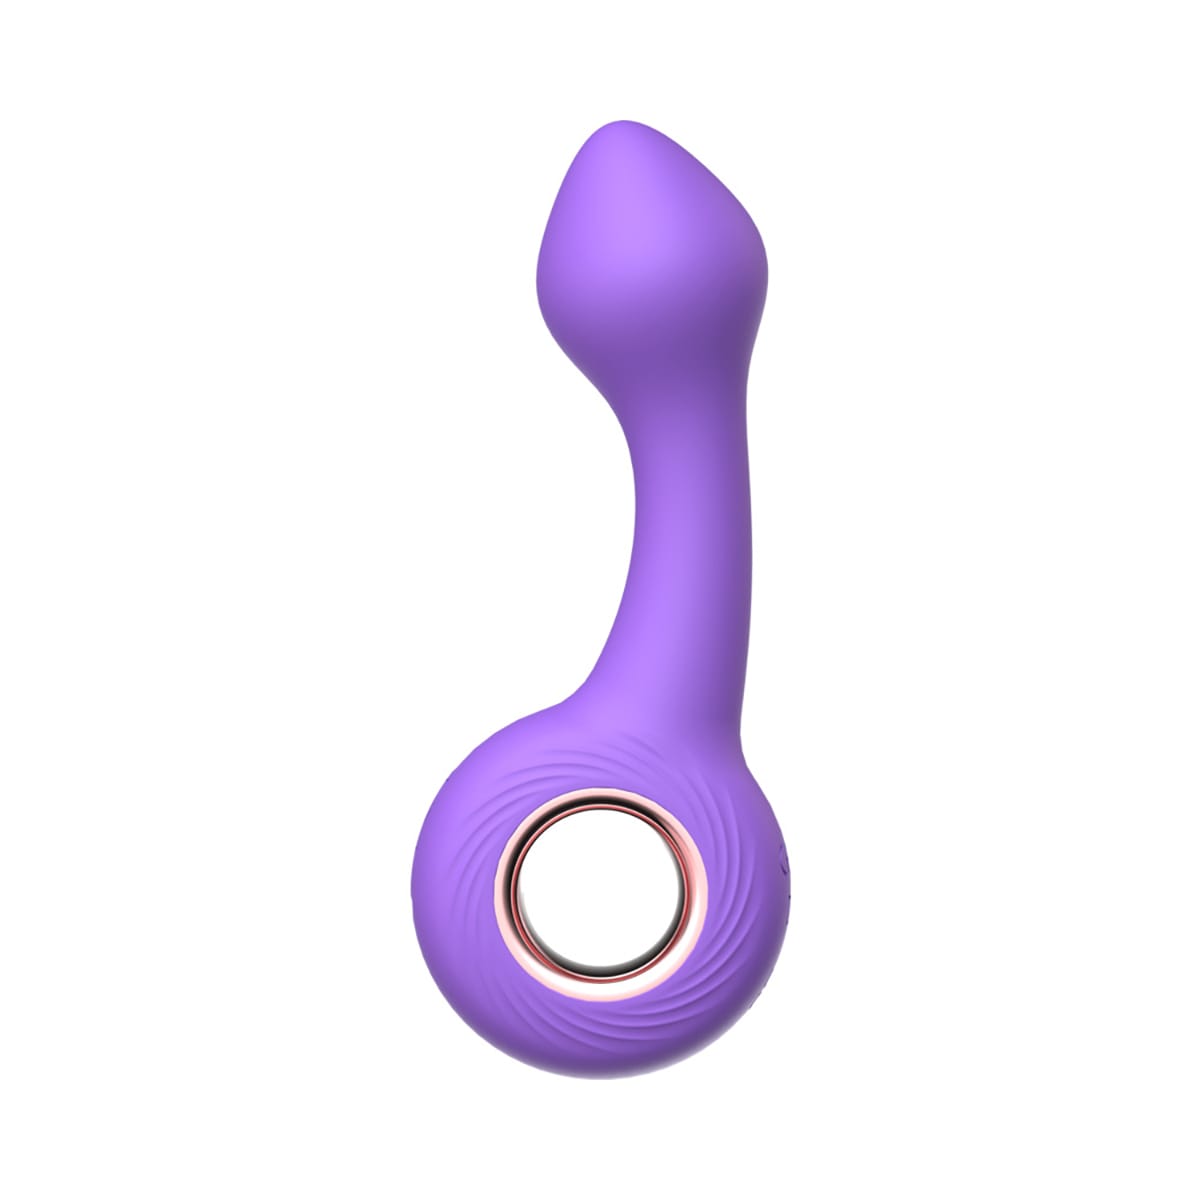 Buy a Luv Inc Pt16: Pointed Tip Ring Vibe Purple vibrator.